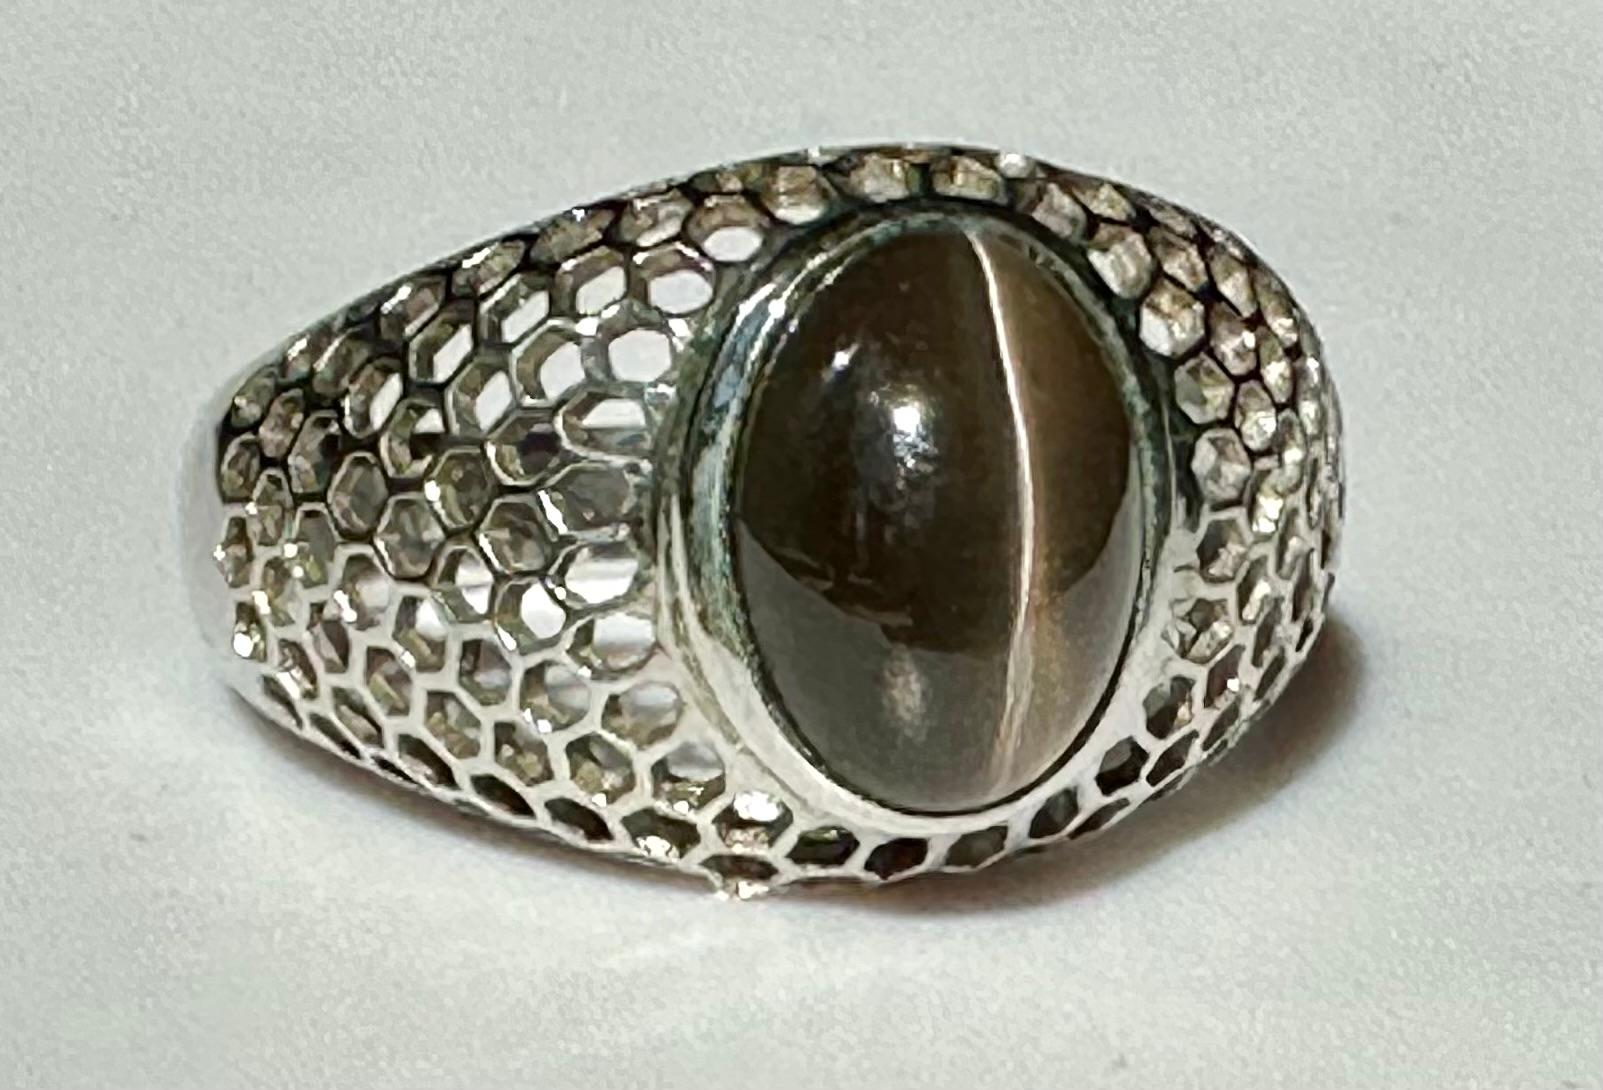 A Rare and Hard to Find Sillimanite Cats Eye Cabochon set in a Silver Dome Ring For Sale 5